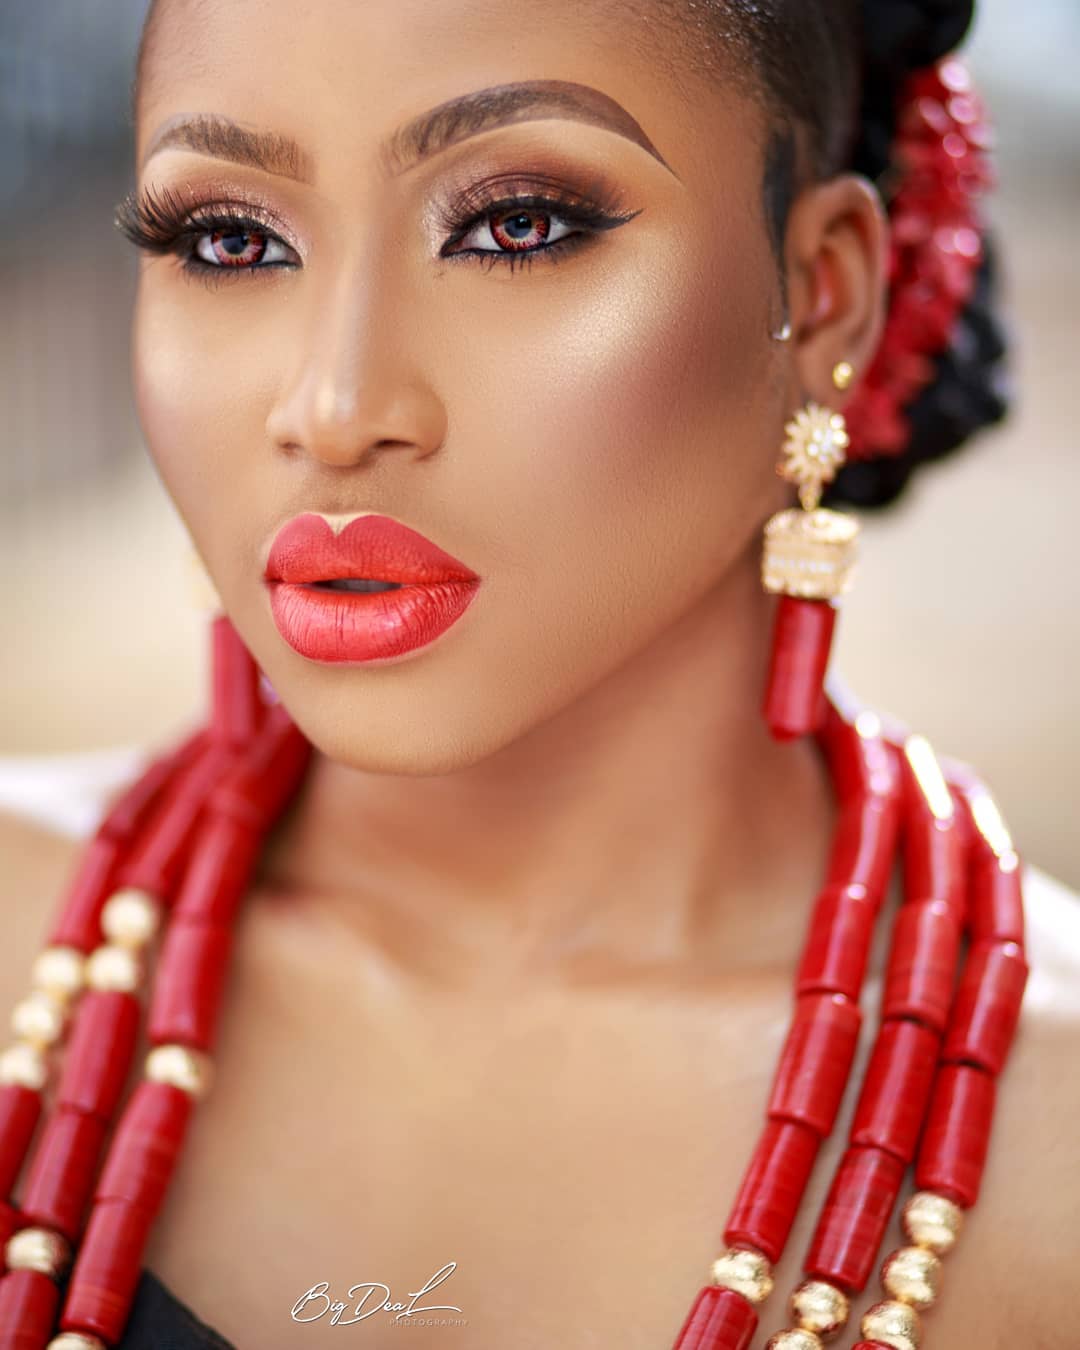 Dear Igbo Brides-to-be, Don't Sleep on This Traditional Beauty Look